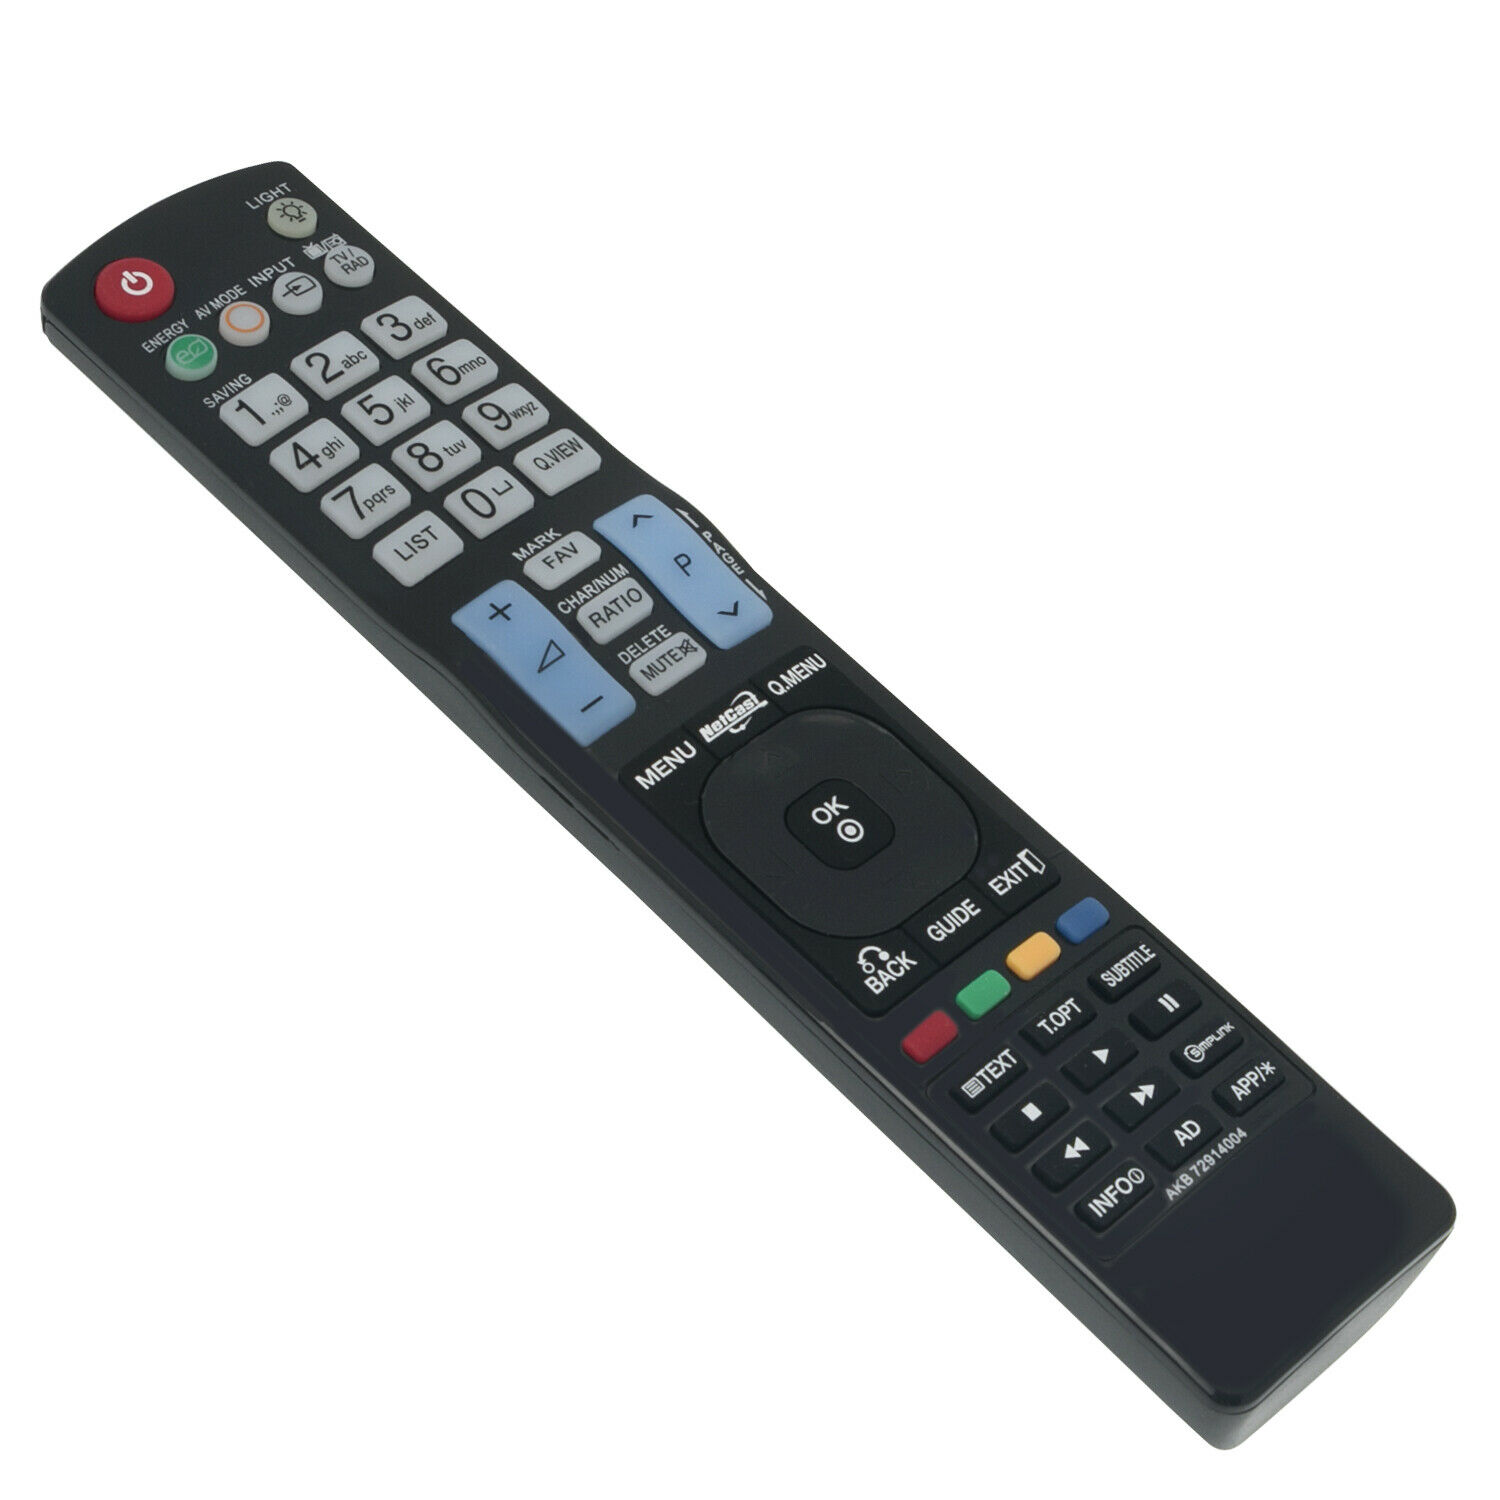 New AKB72914004 Replace Remote for LG TV 32LD650 42LD650 47LD650 55LD650 52LD550 - image 1 of 4